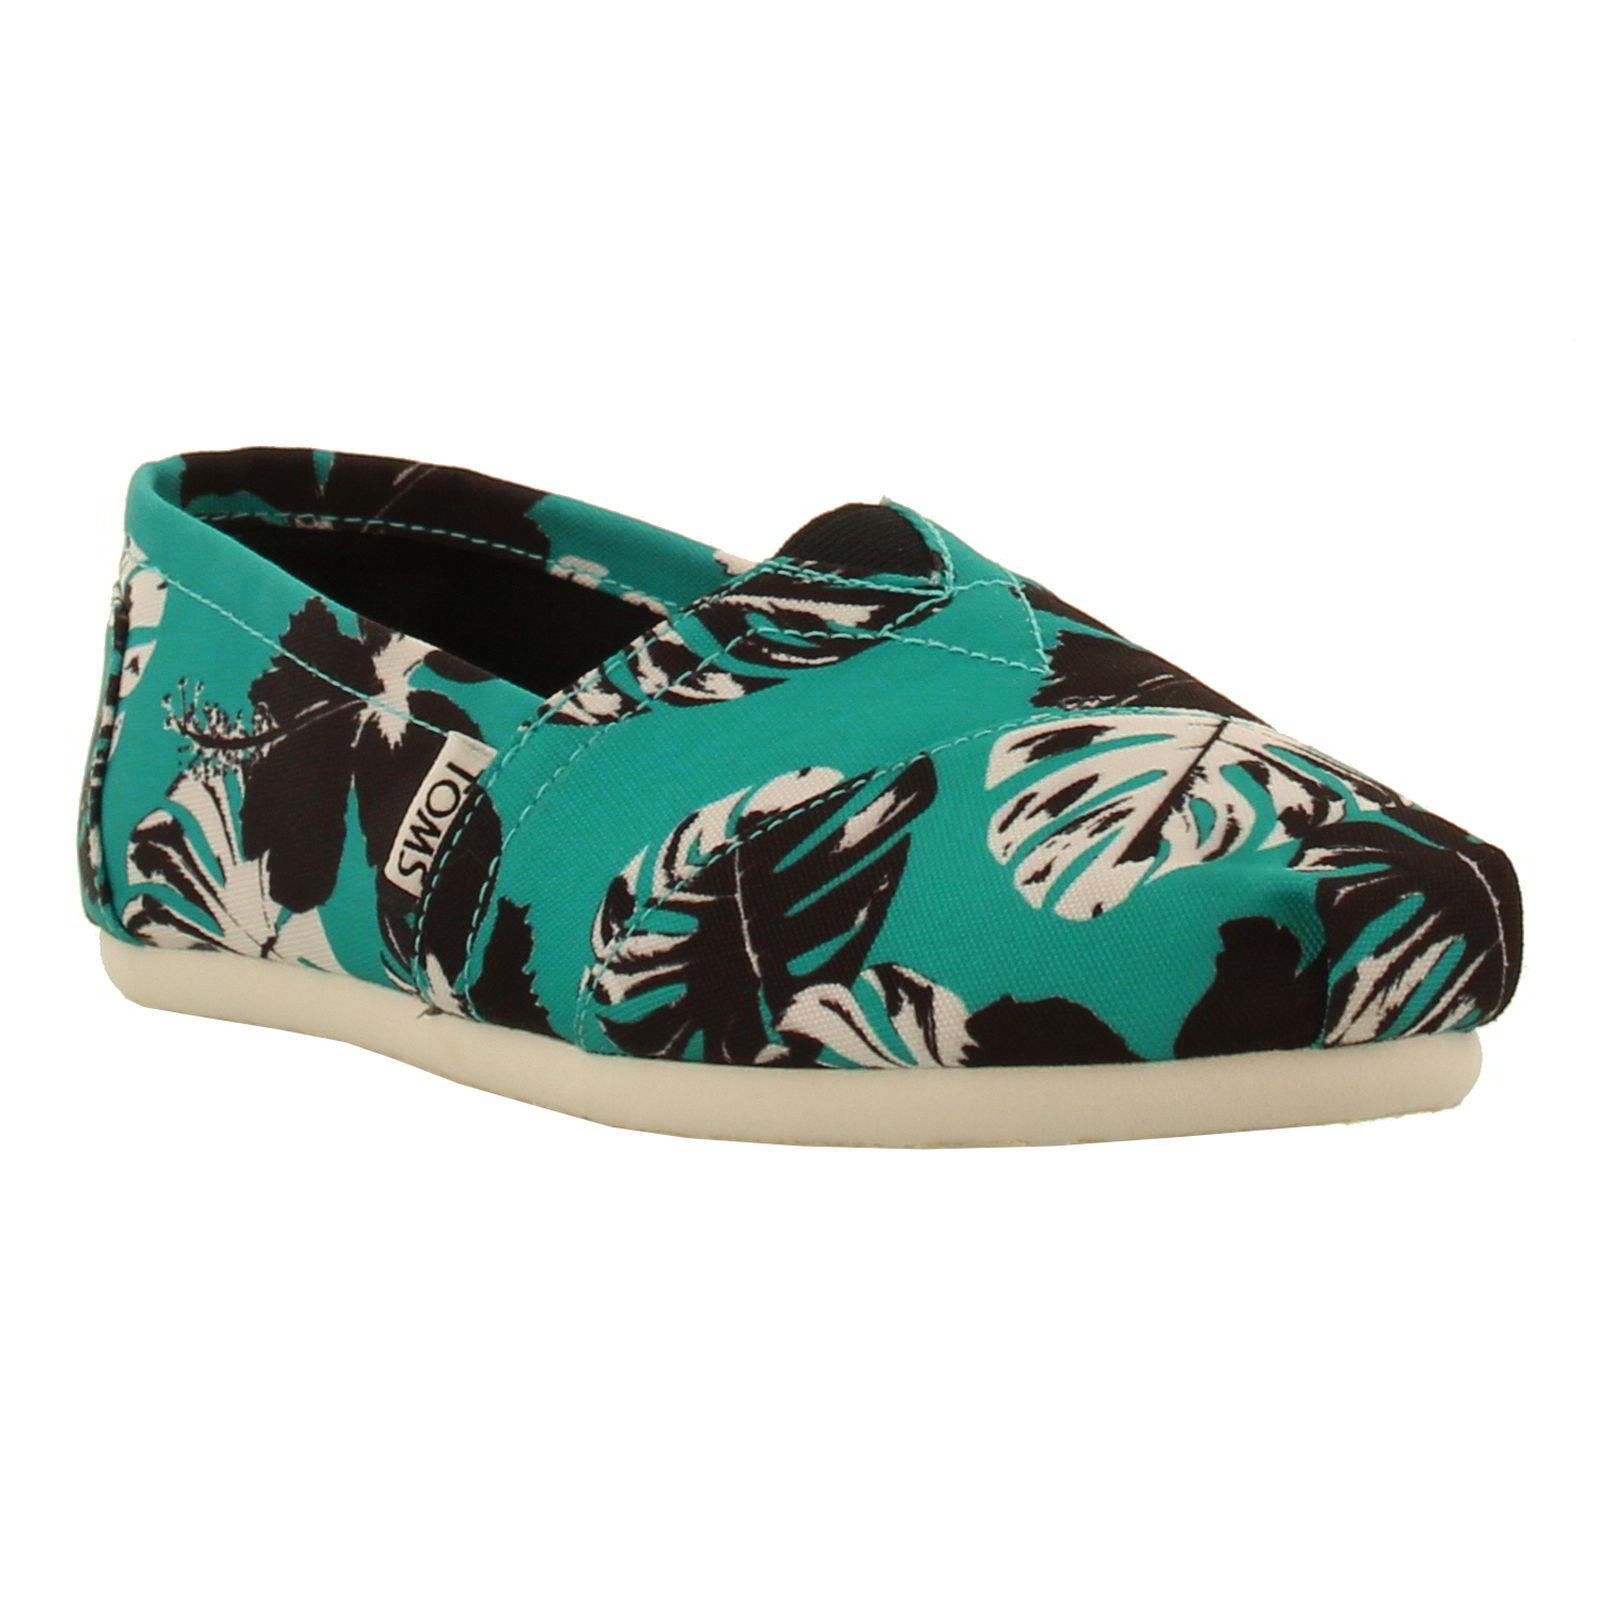 Toms Womens Classics Printed Espadrille Slip On Shoes - UK 9